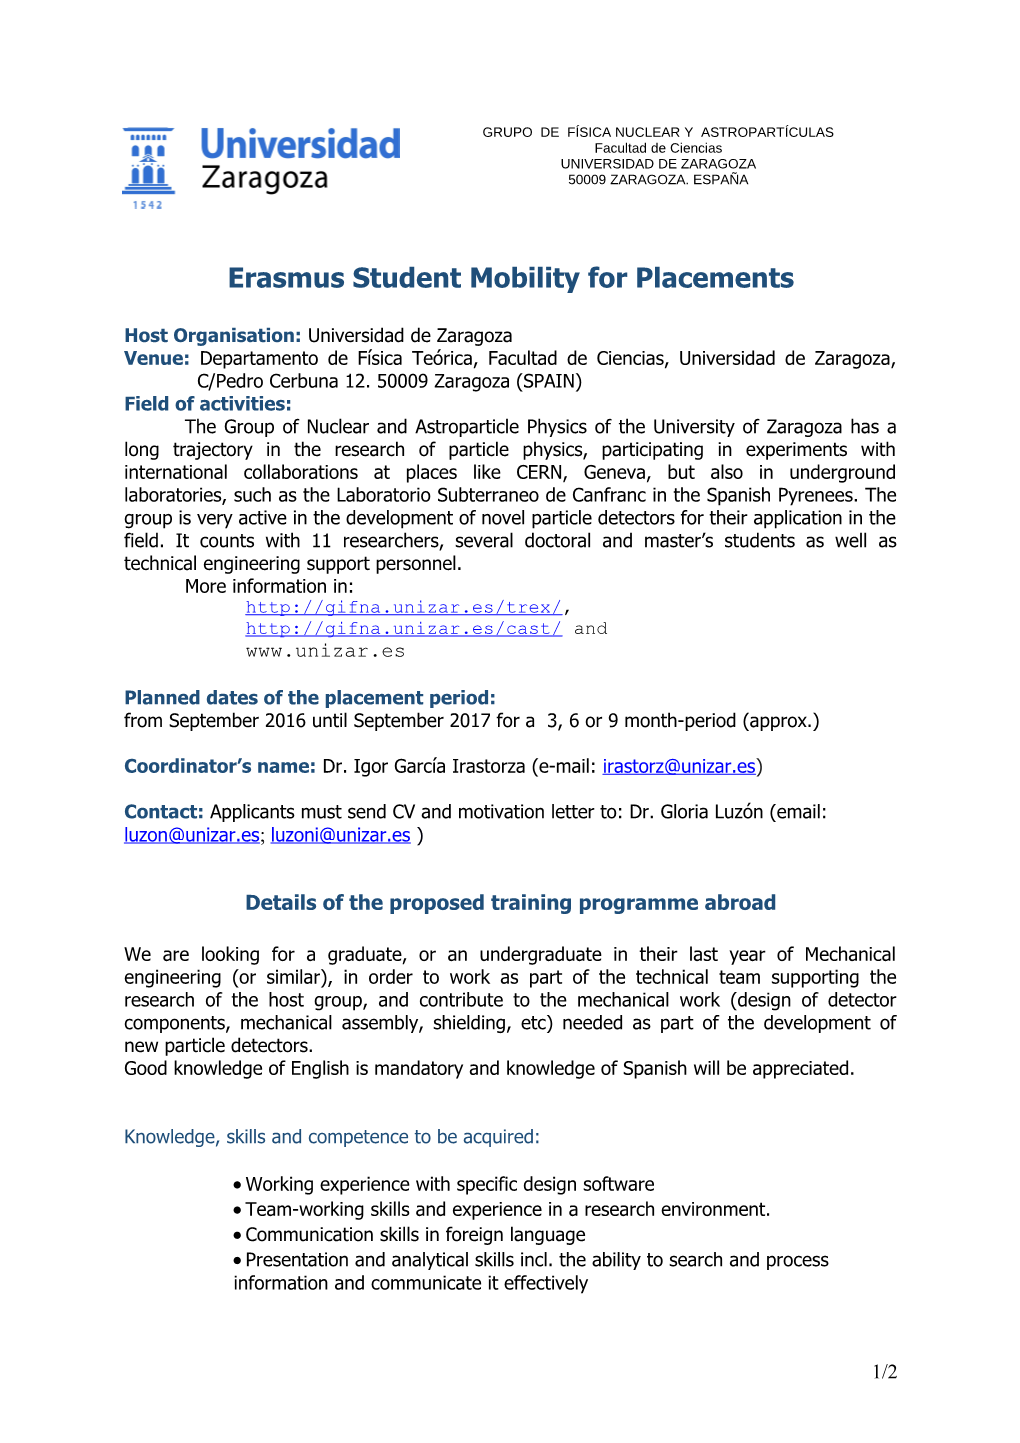 Erasmus Student Mobility for Placements